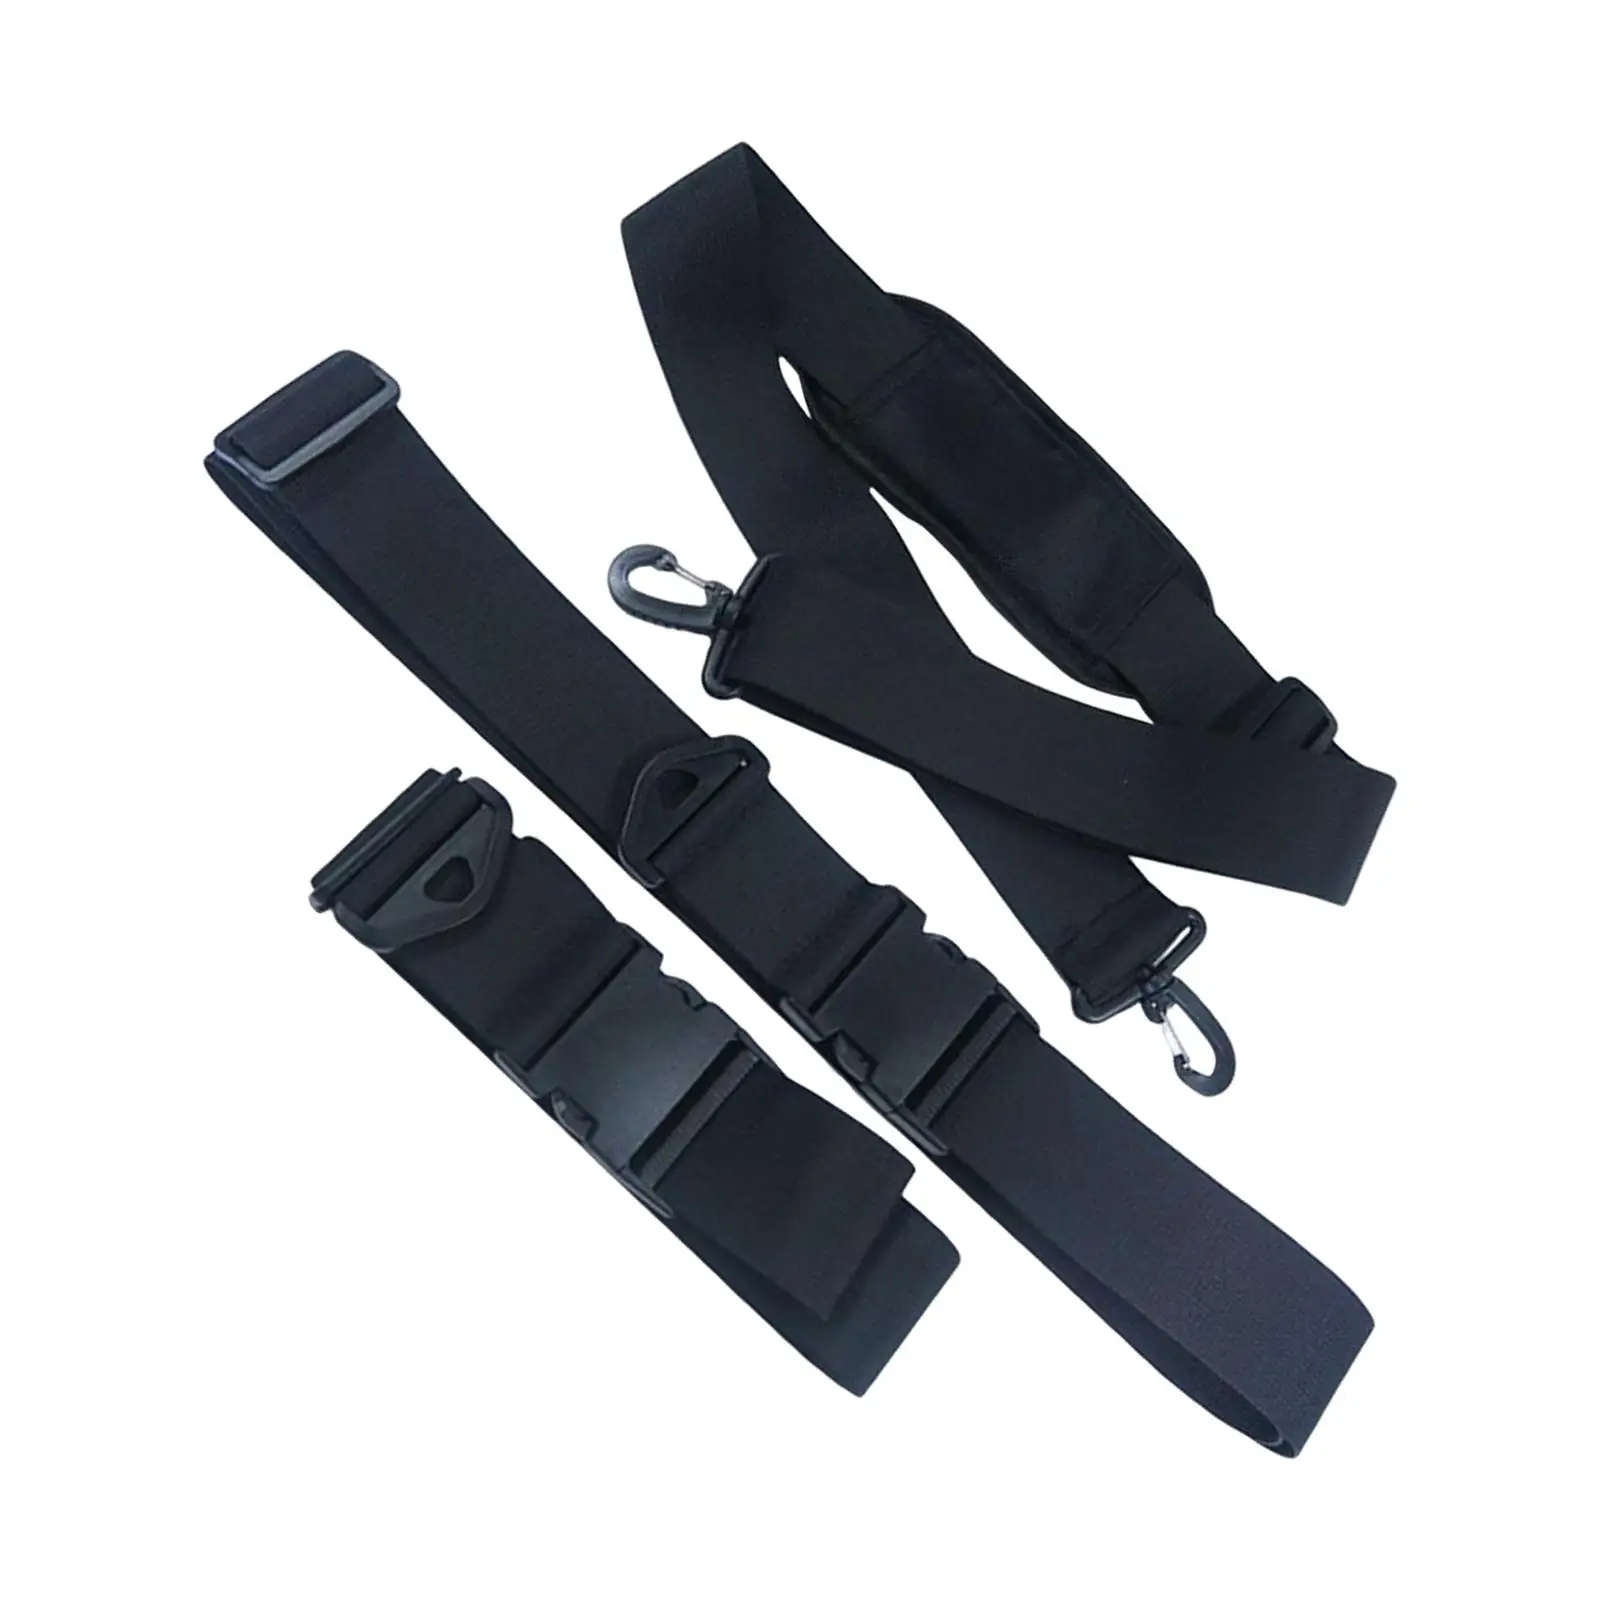 Carrying Sling Carrier Outdoor Storage Universal with Metal Hooks Paddle Board Shoulder Strap for Longboard Paddleboard Canoe